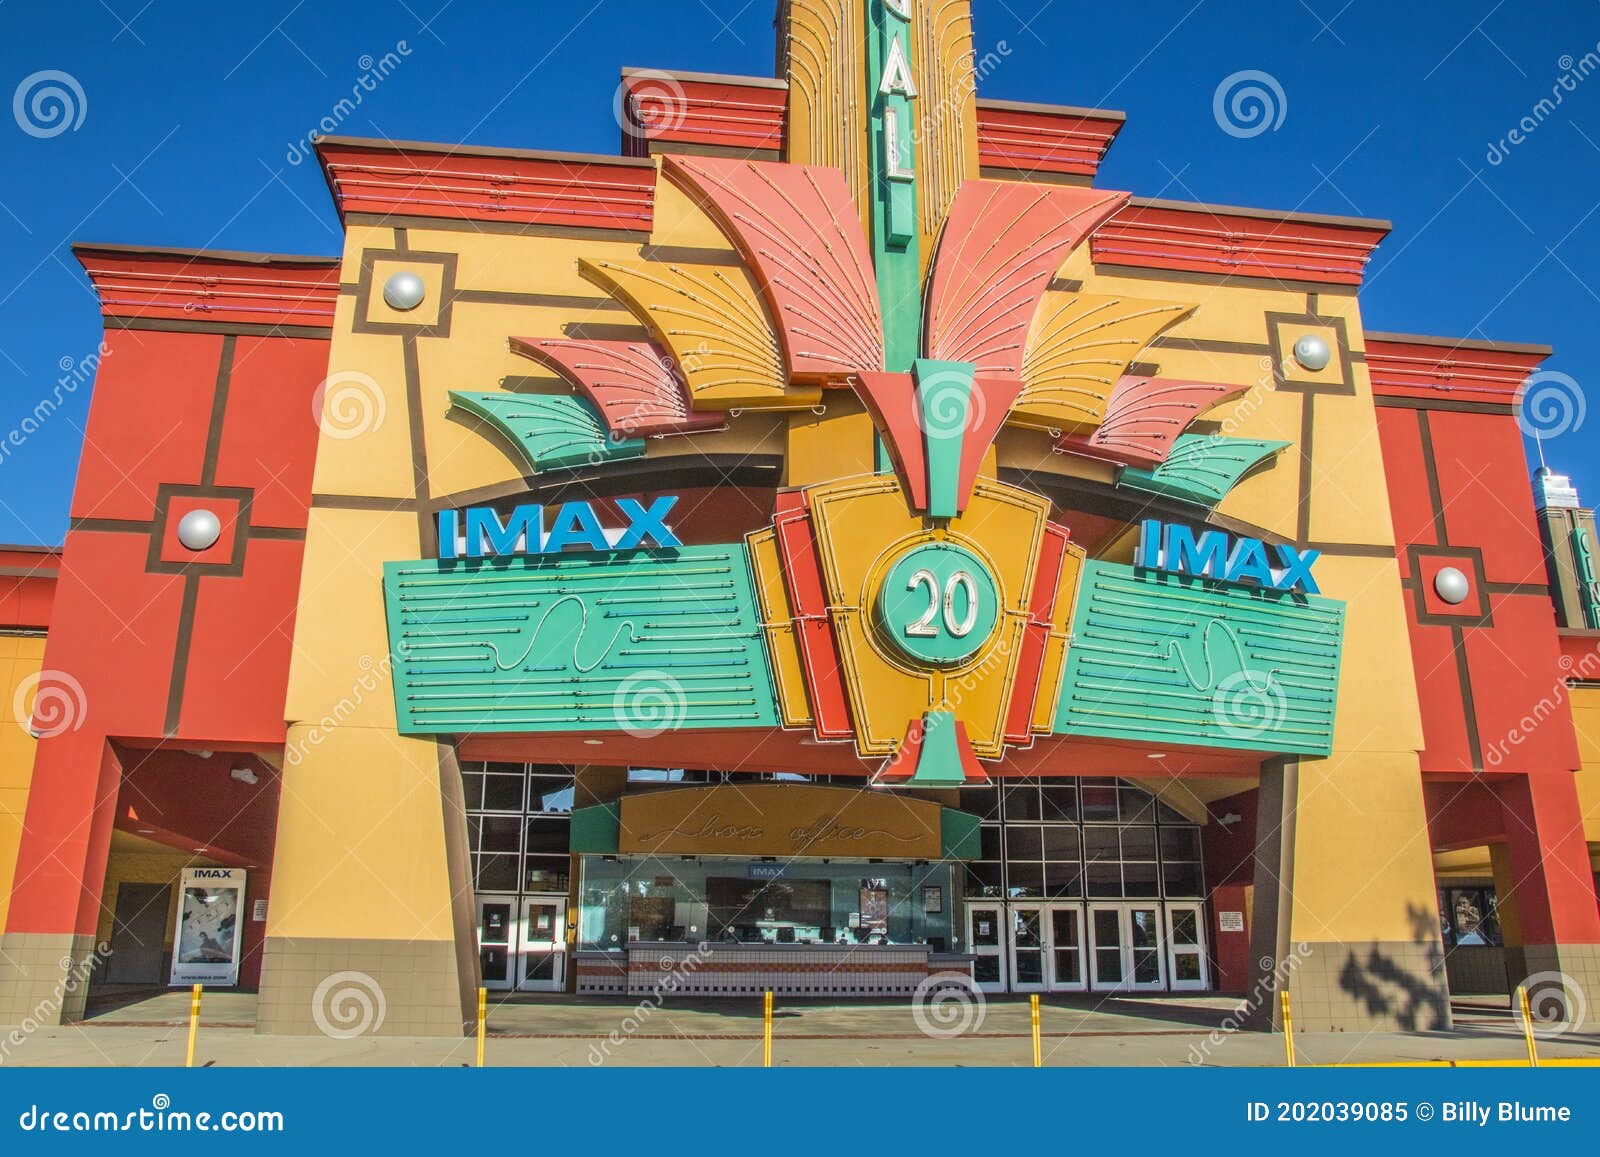 127 Closed Movie Theater Covid Photos - Free Royalty-free Stock Photos From Dreamstime